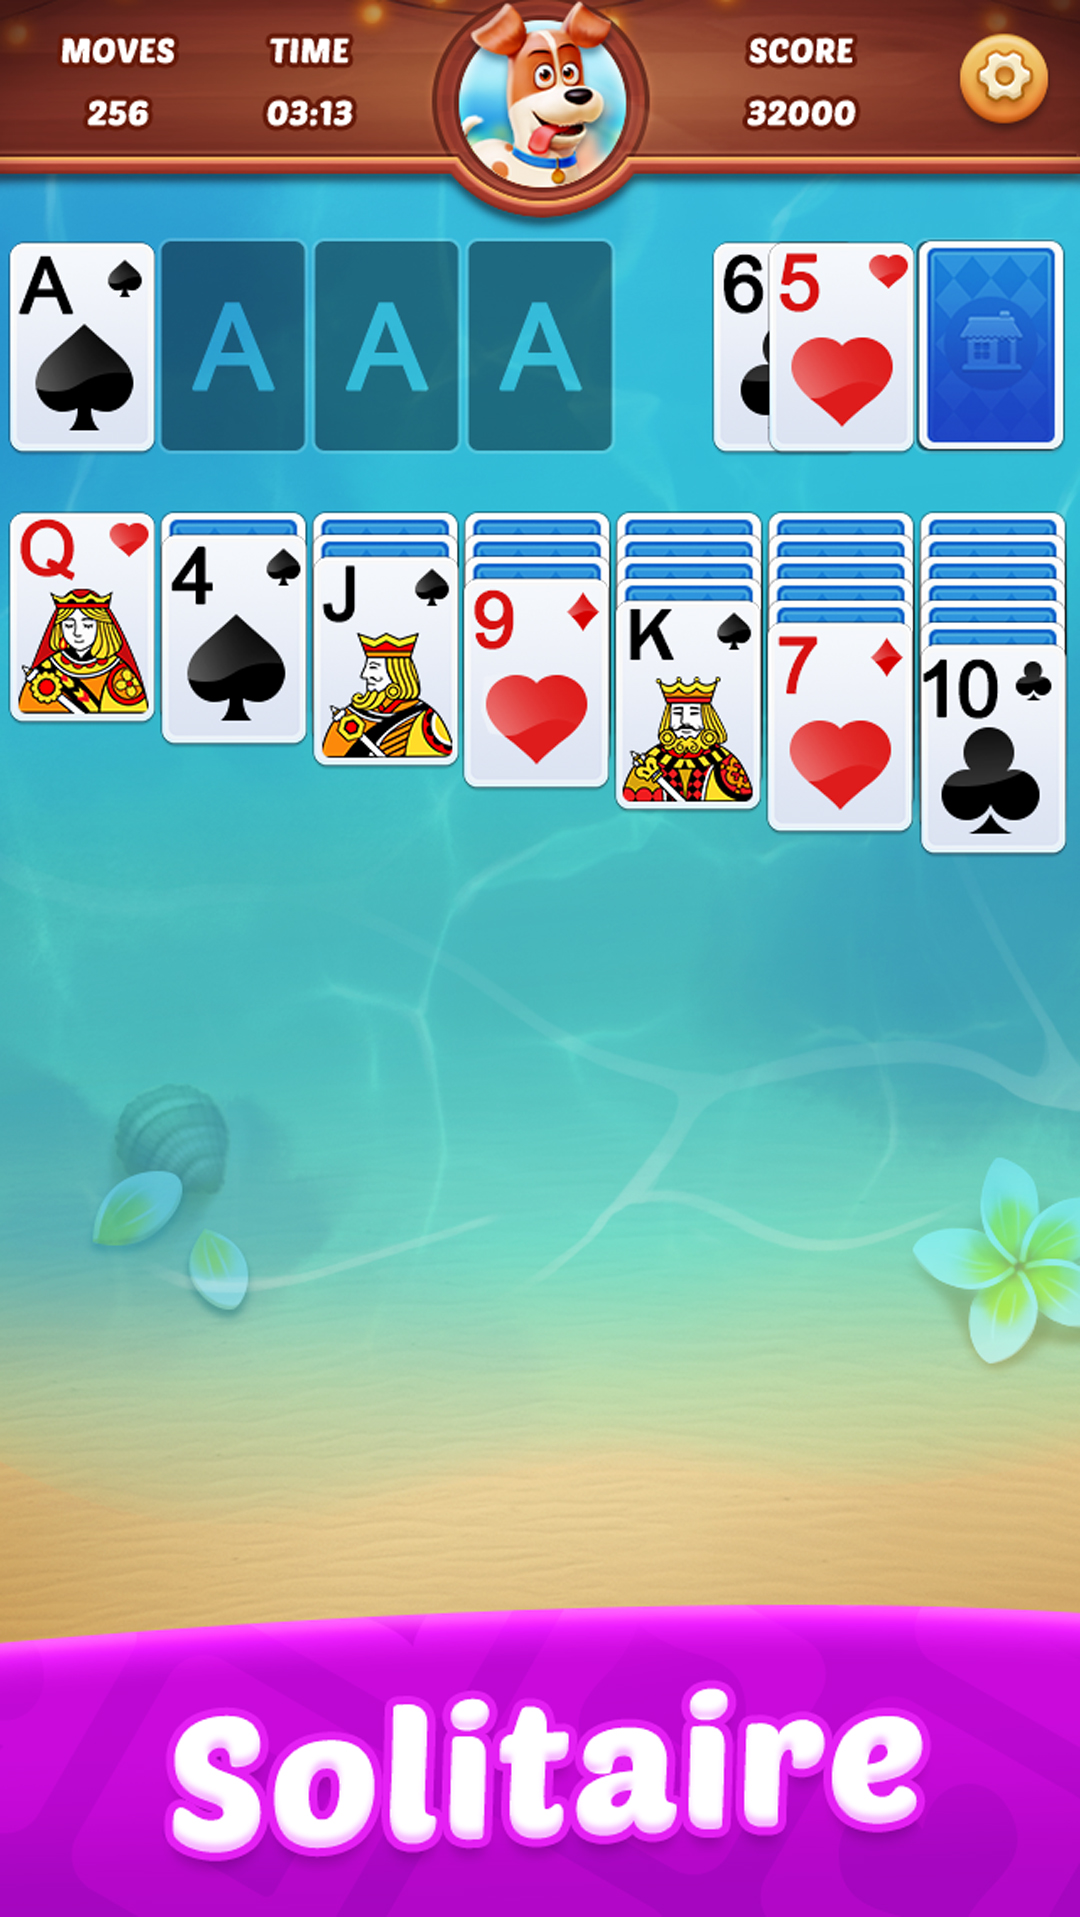 Gameplay of the Solitaire: Card Games for Android phone or tablet.